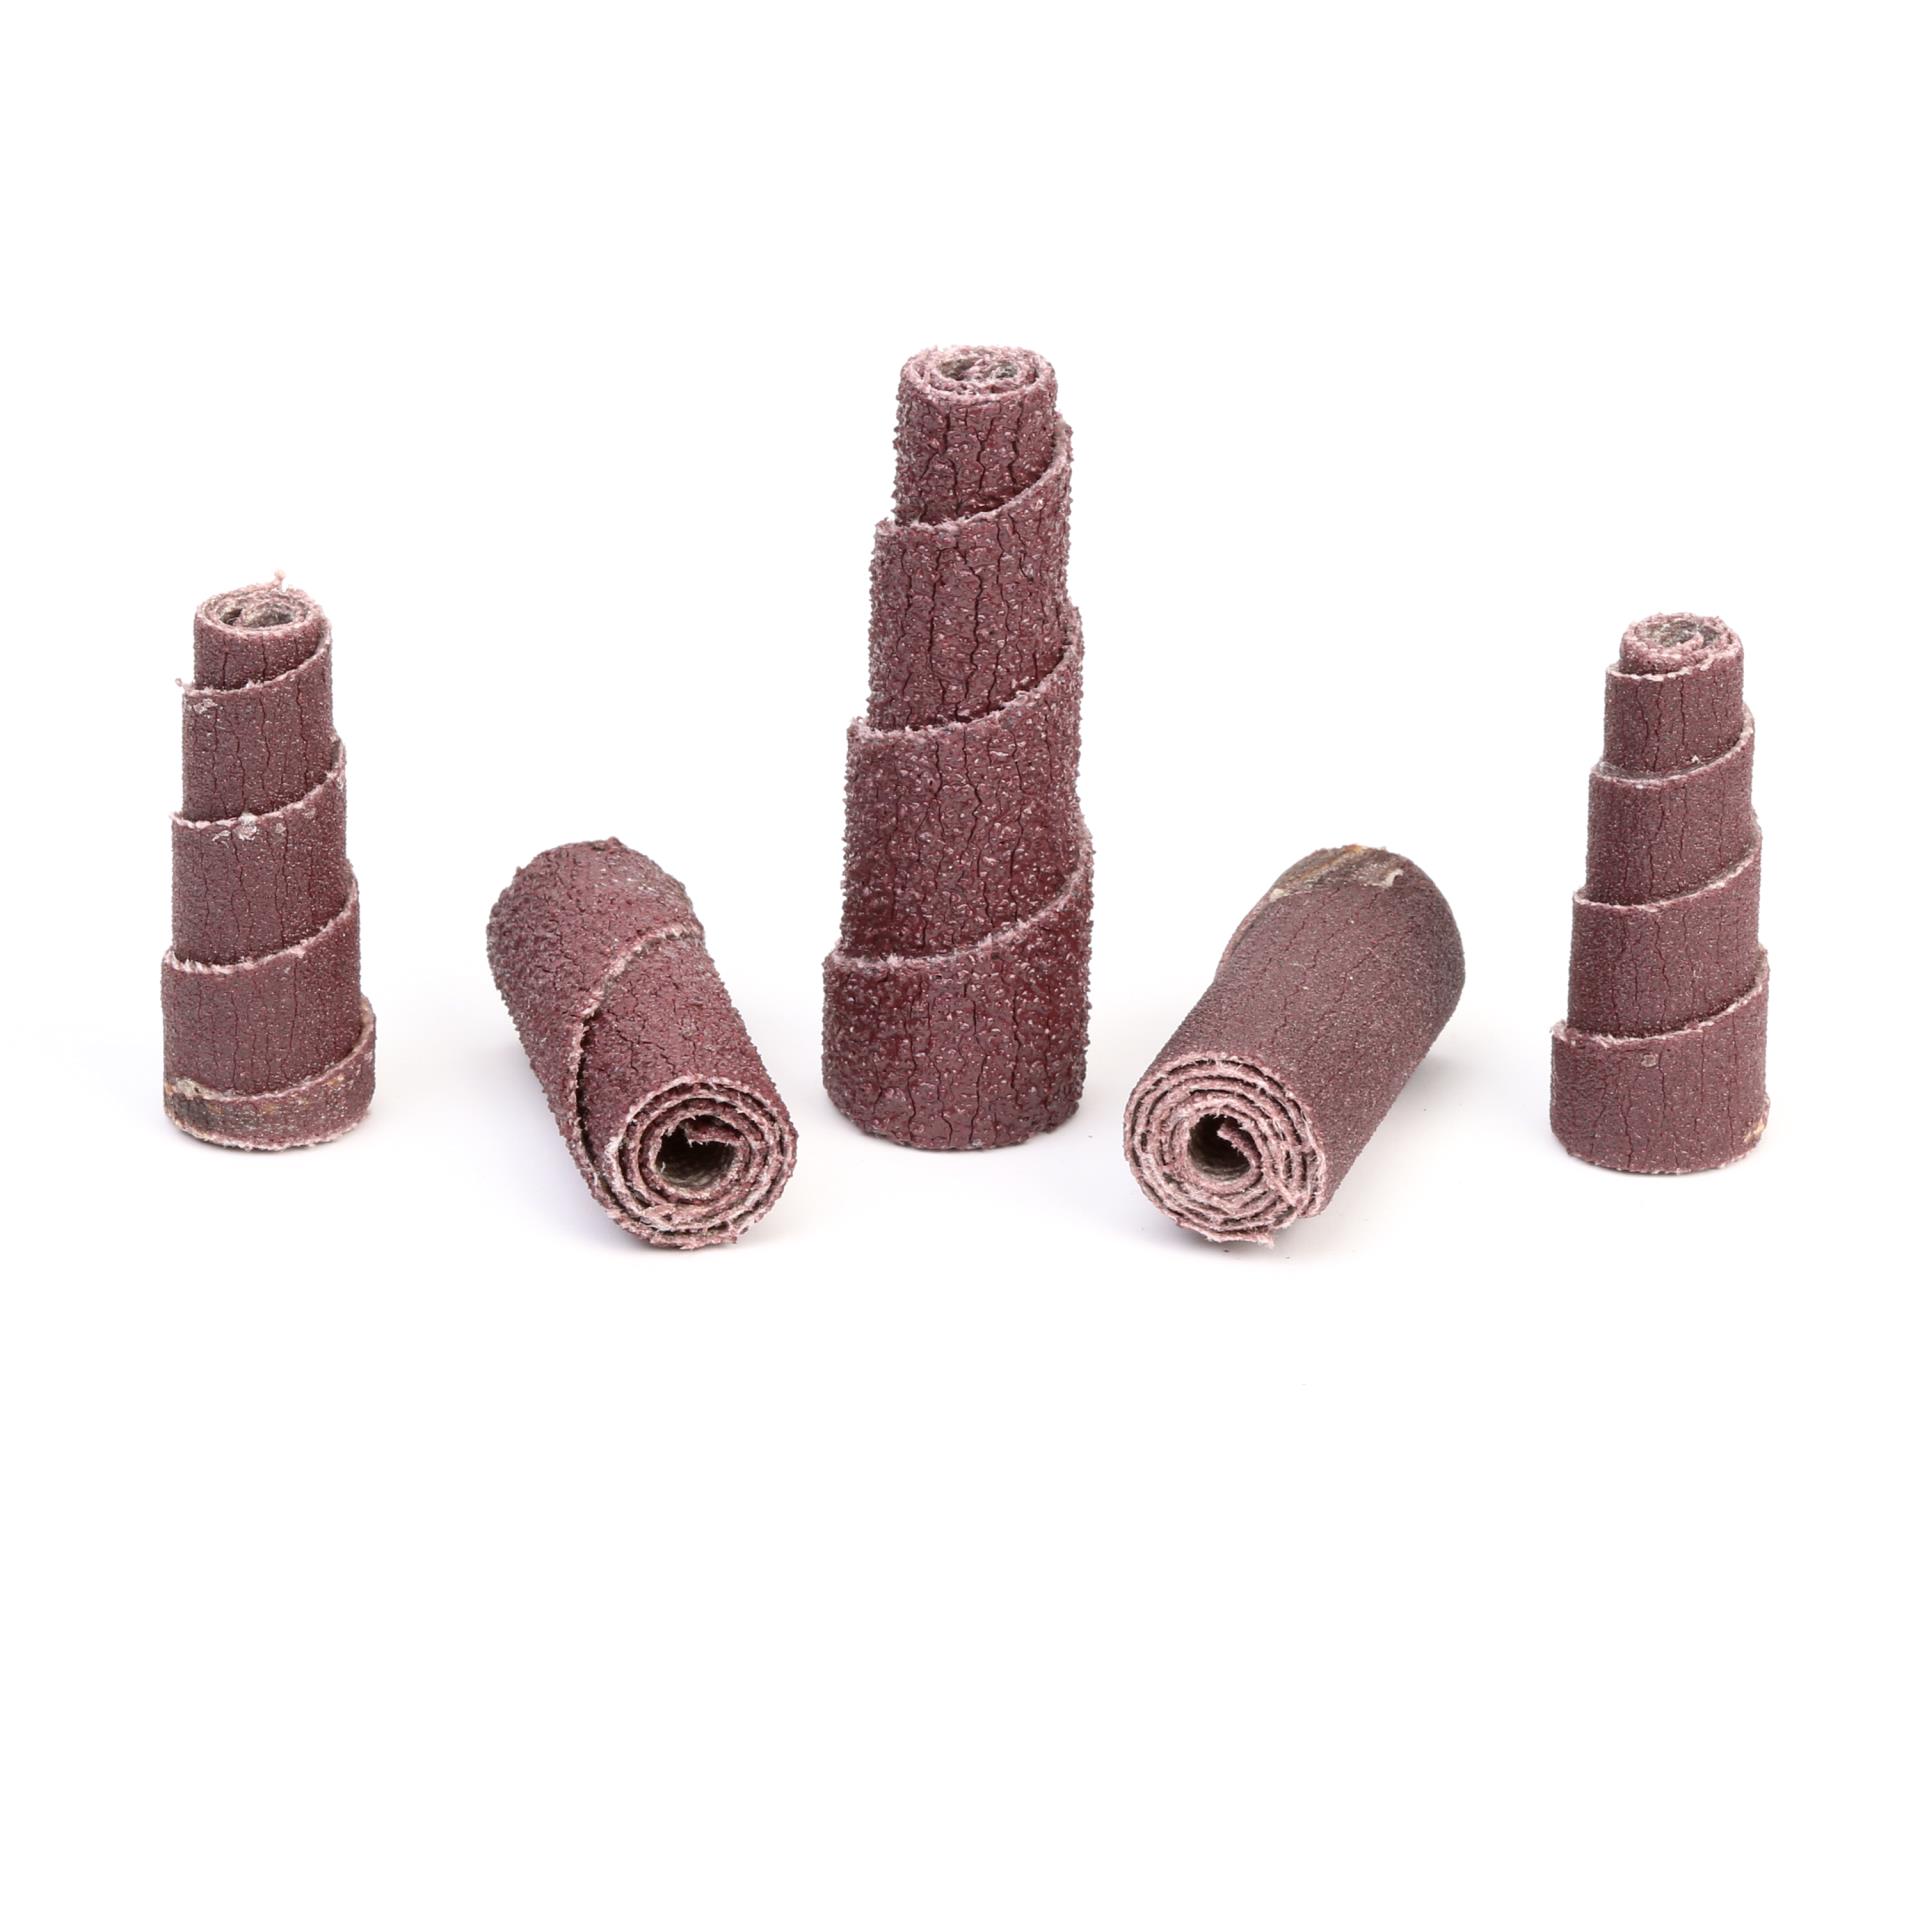 3x 11mm 2000 Grit Sandpaper Deburring Flap Rotary Wheel Hole Grinding Drill Tool 